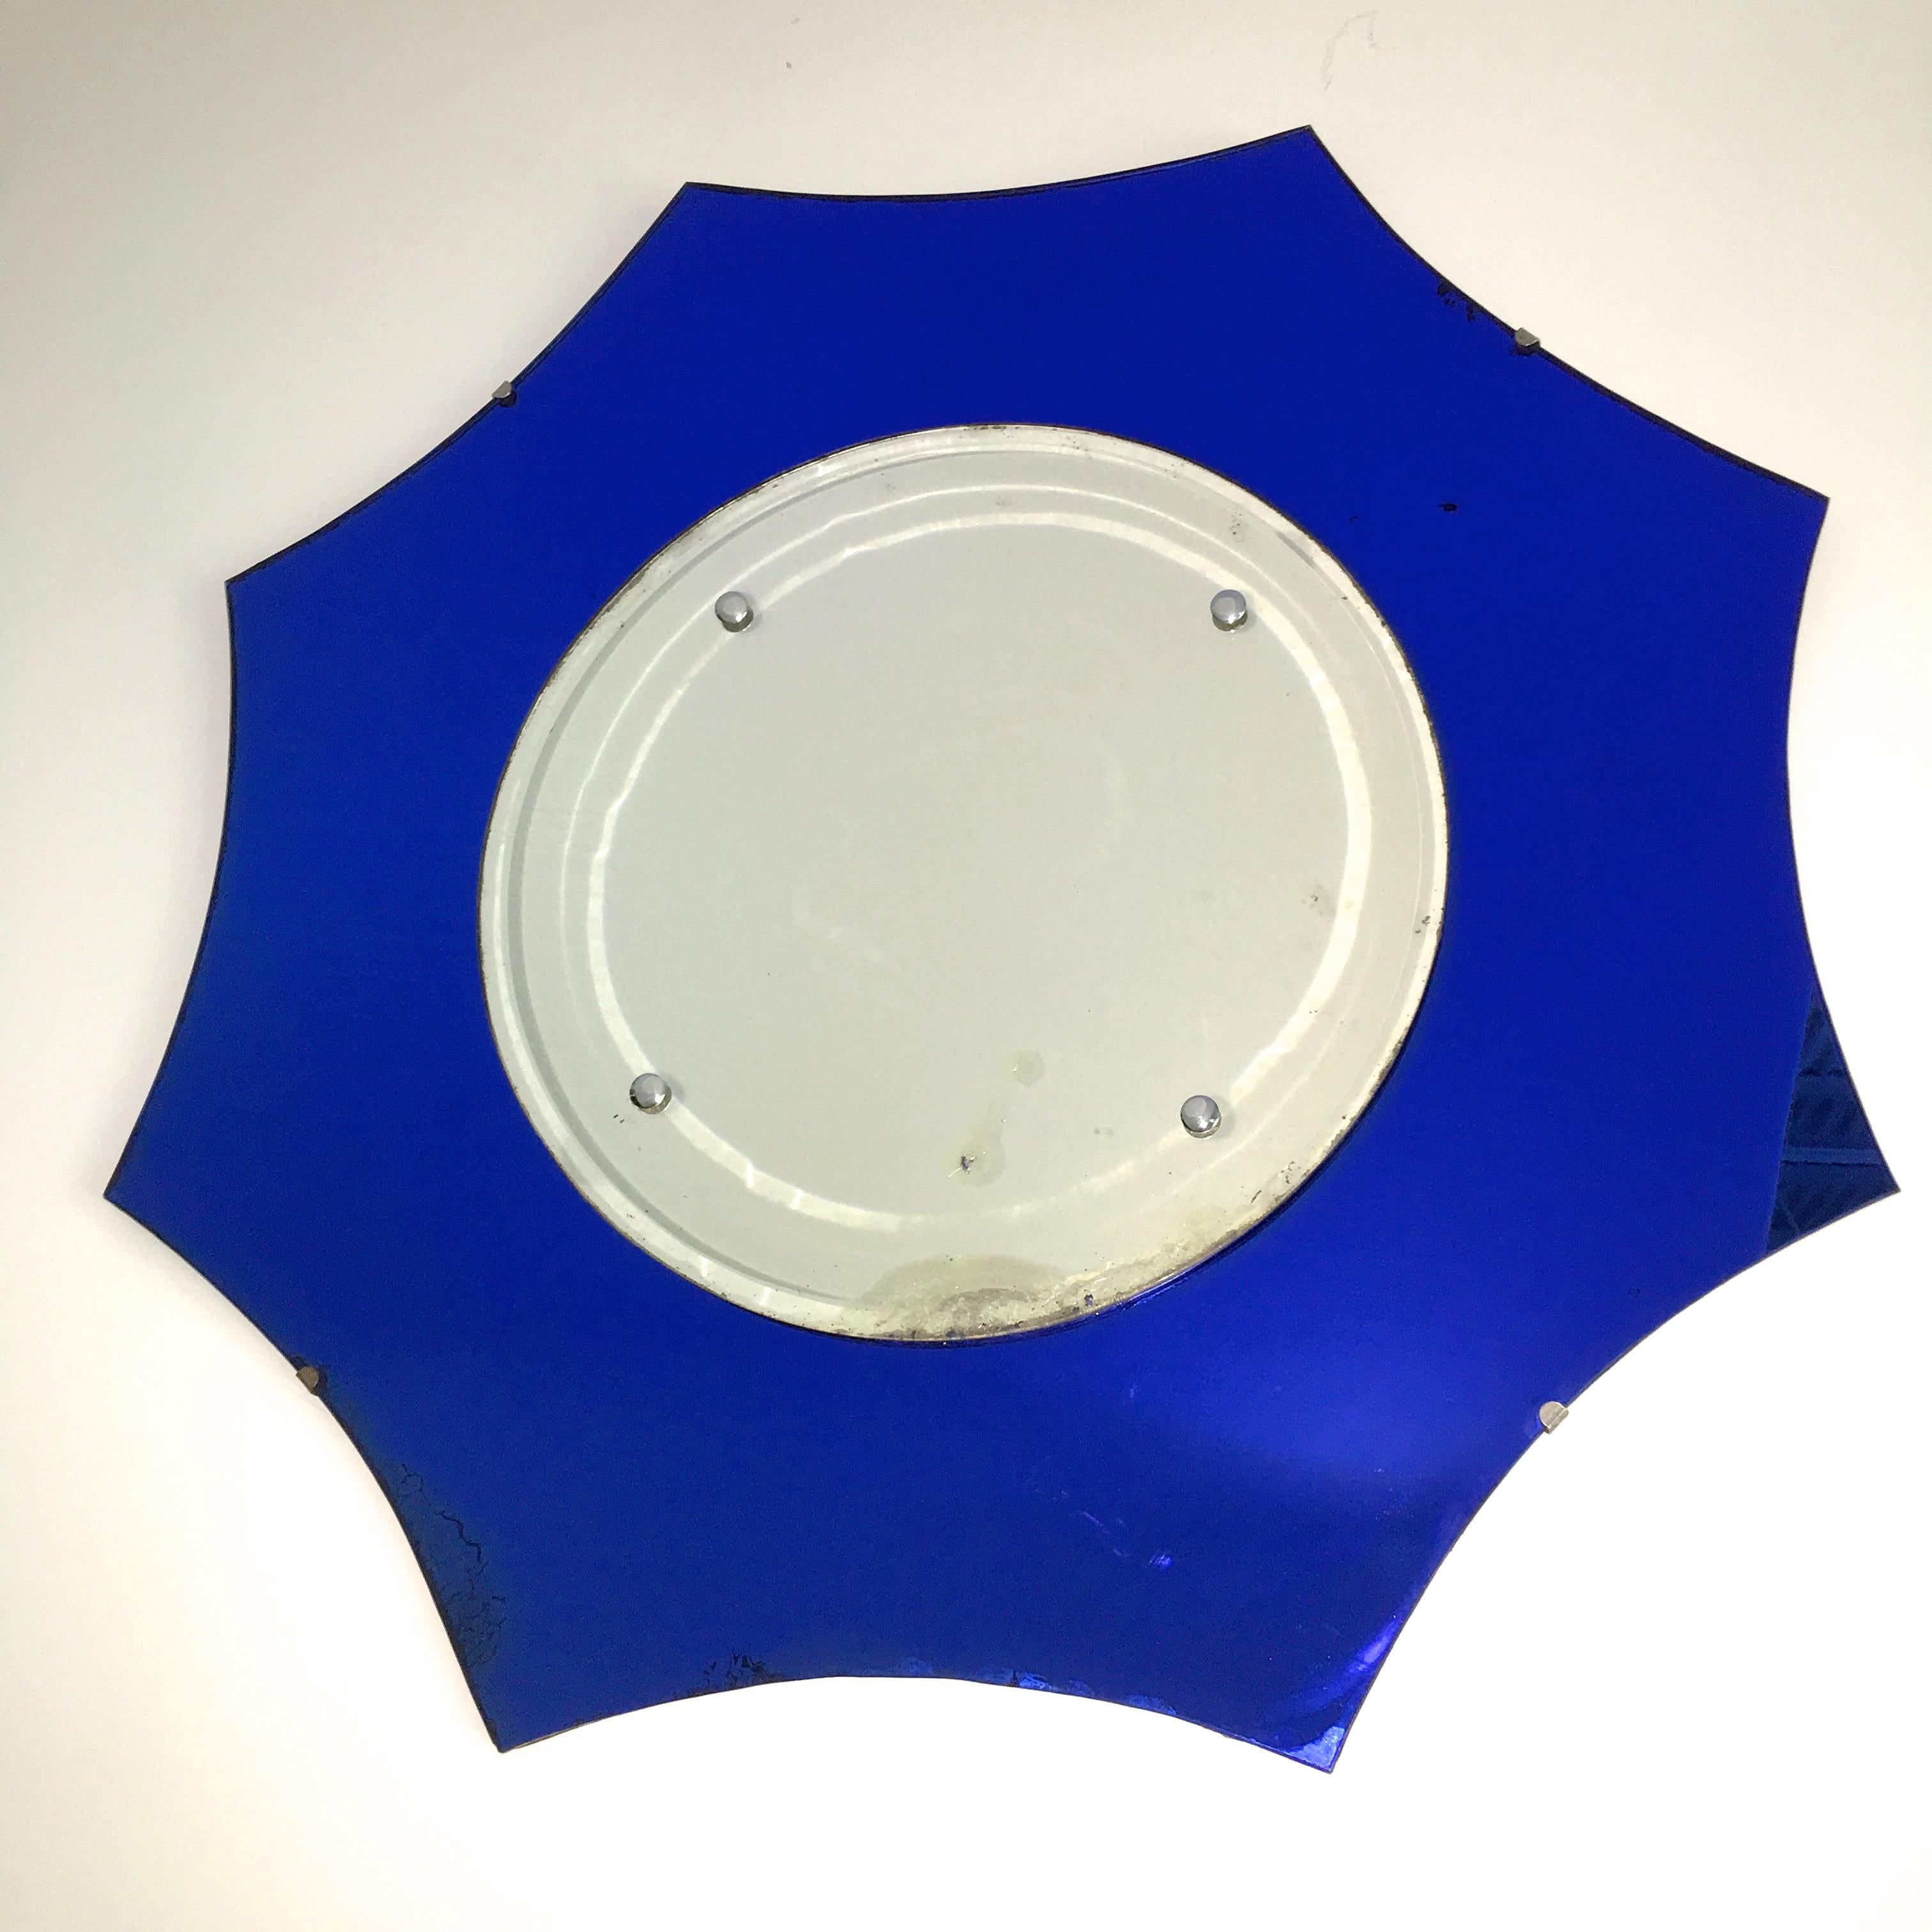 1930s American star pointed midnight blue glass mirror with round beveled glass silver mirror applied on center with four chromed cap fittings, clipped to thin wood back. Most likely Tufflex glass, then a division of Libbey Owens Ford and used by